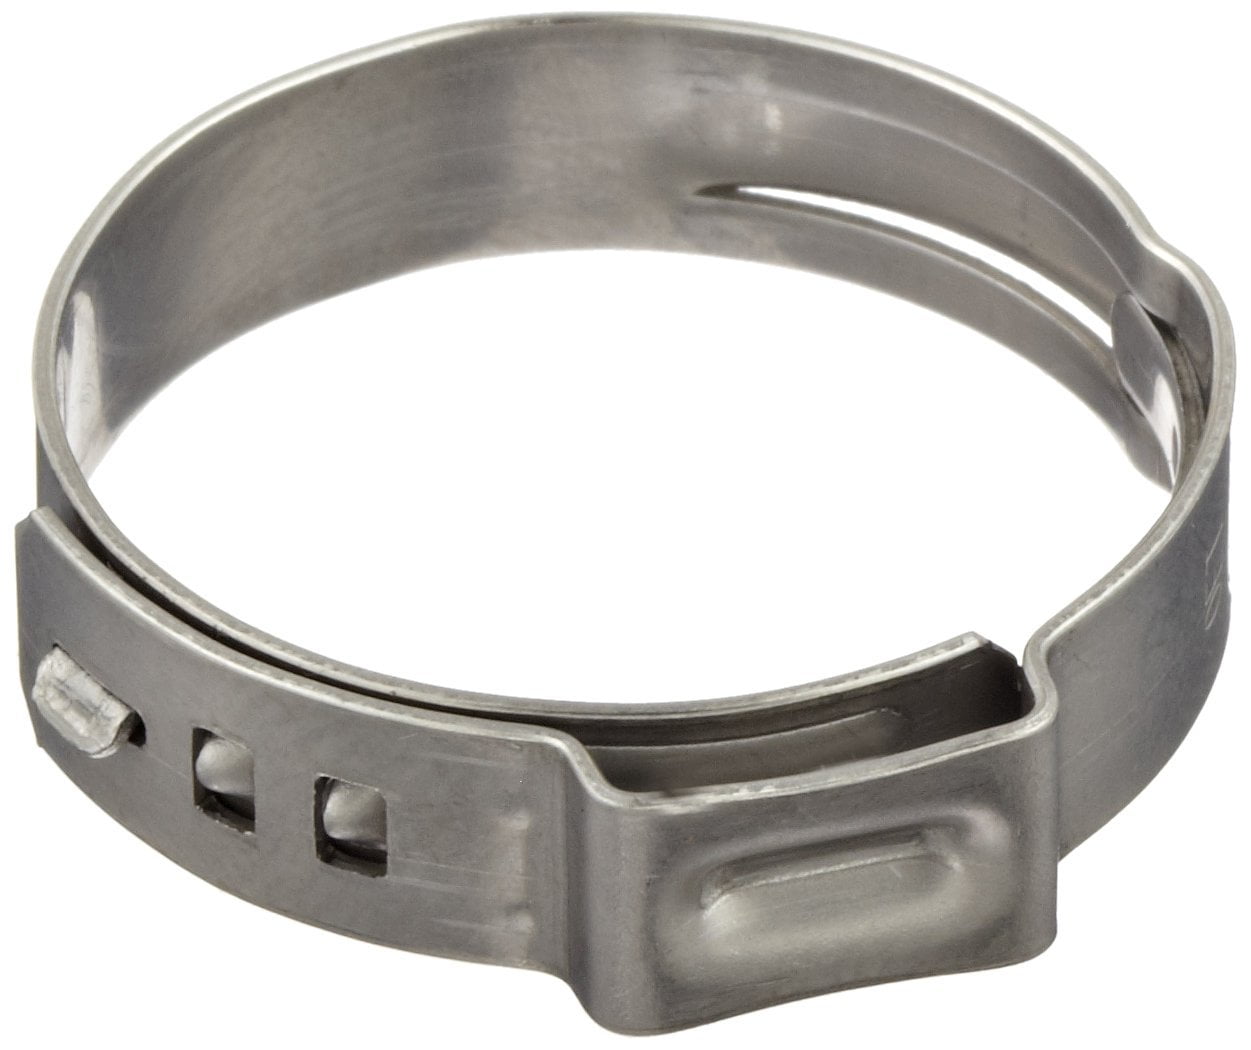 Oetiker 17800122 Stainless Steel Stepless Hose Clamp Band Width 9 mm - 28 mm Clamp ID Range 22 mm Closed Bolted Pack of 10 Open